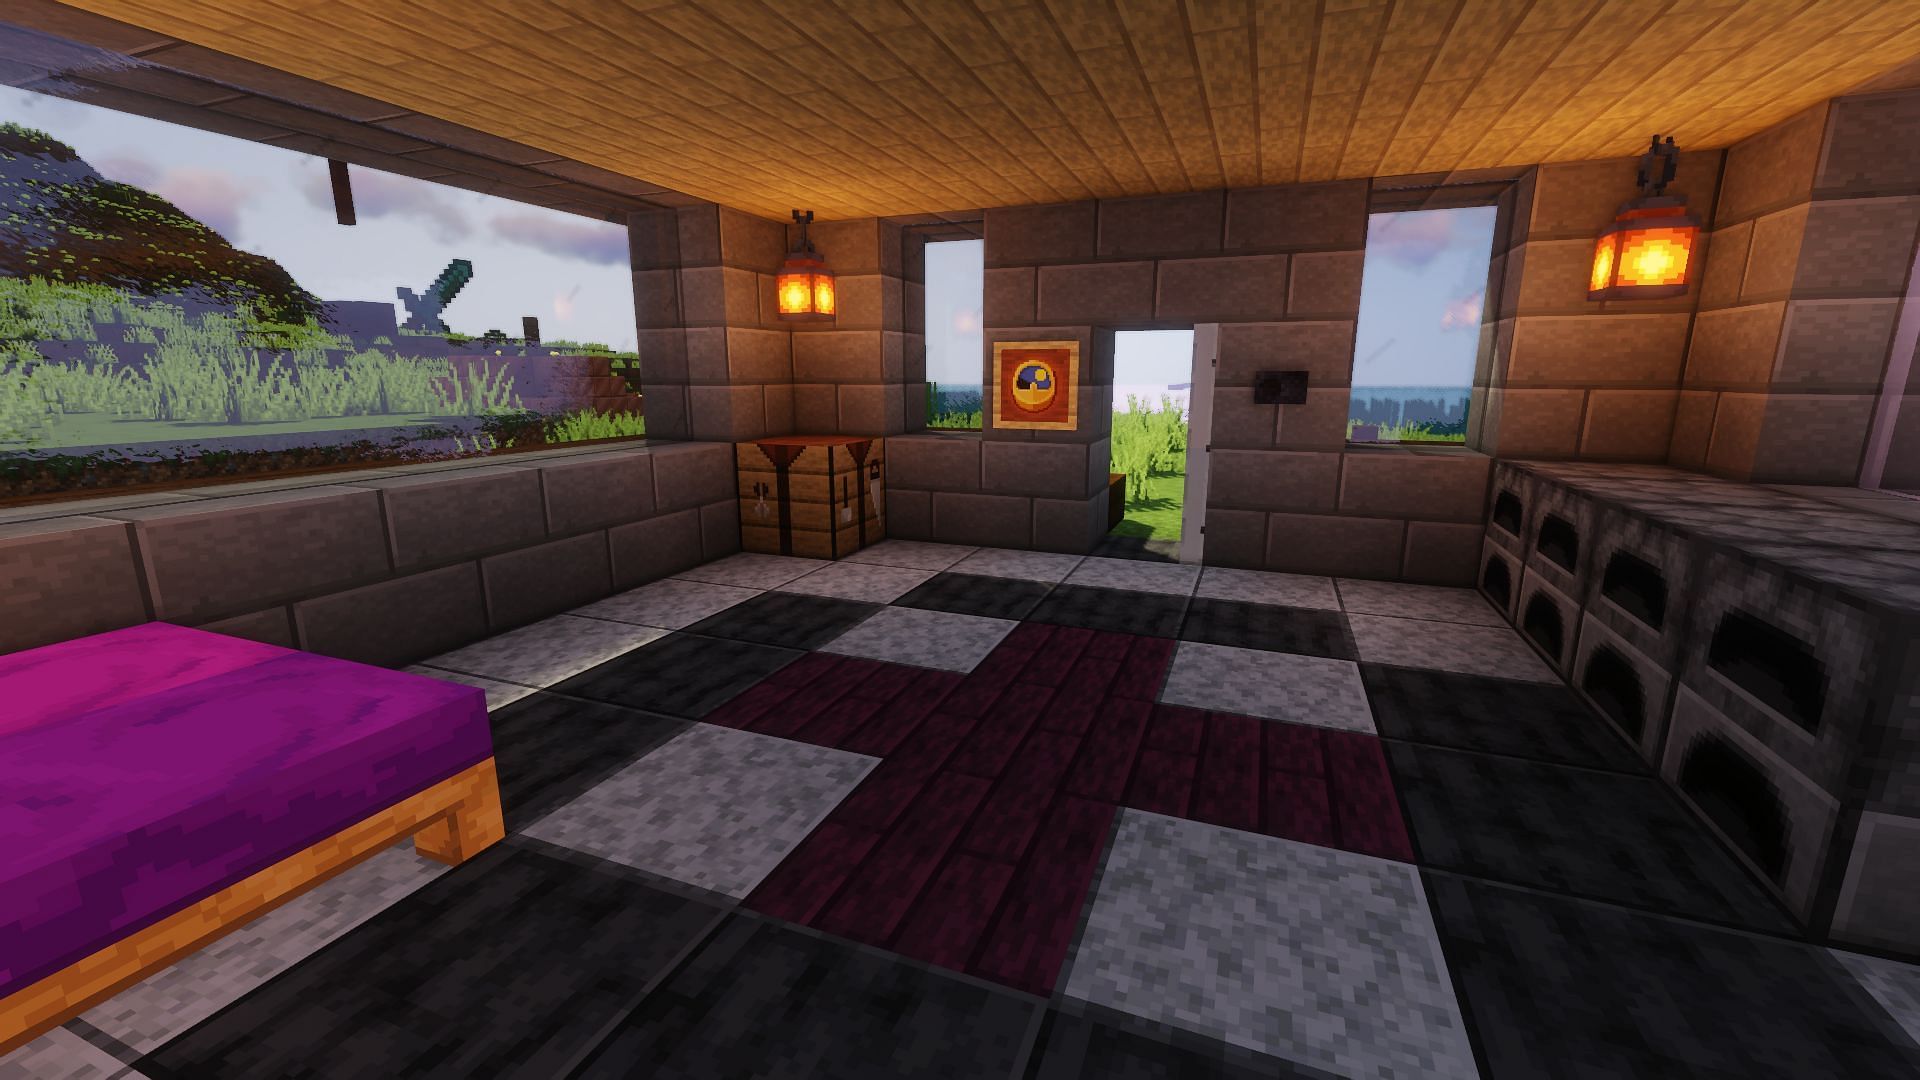 The build with the Faithful 32x32 texture pack (Image via Minecraft)